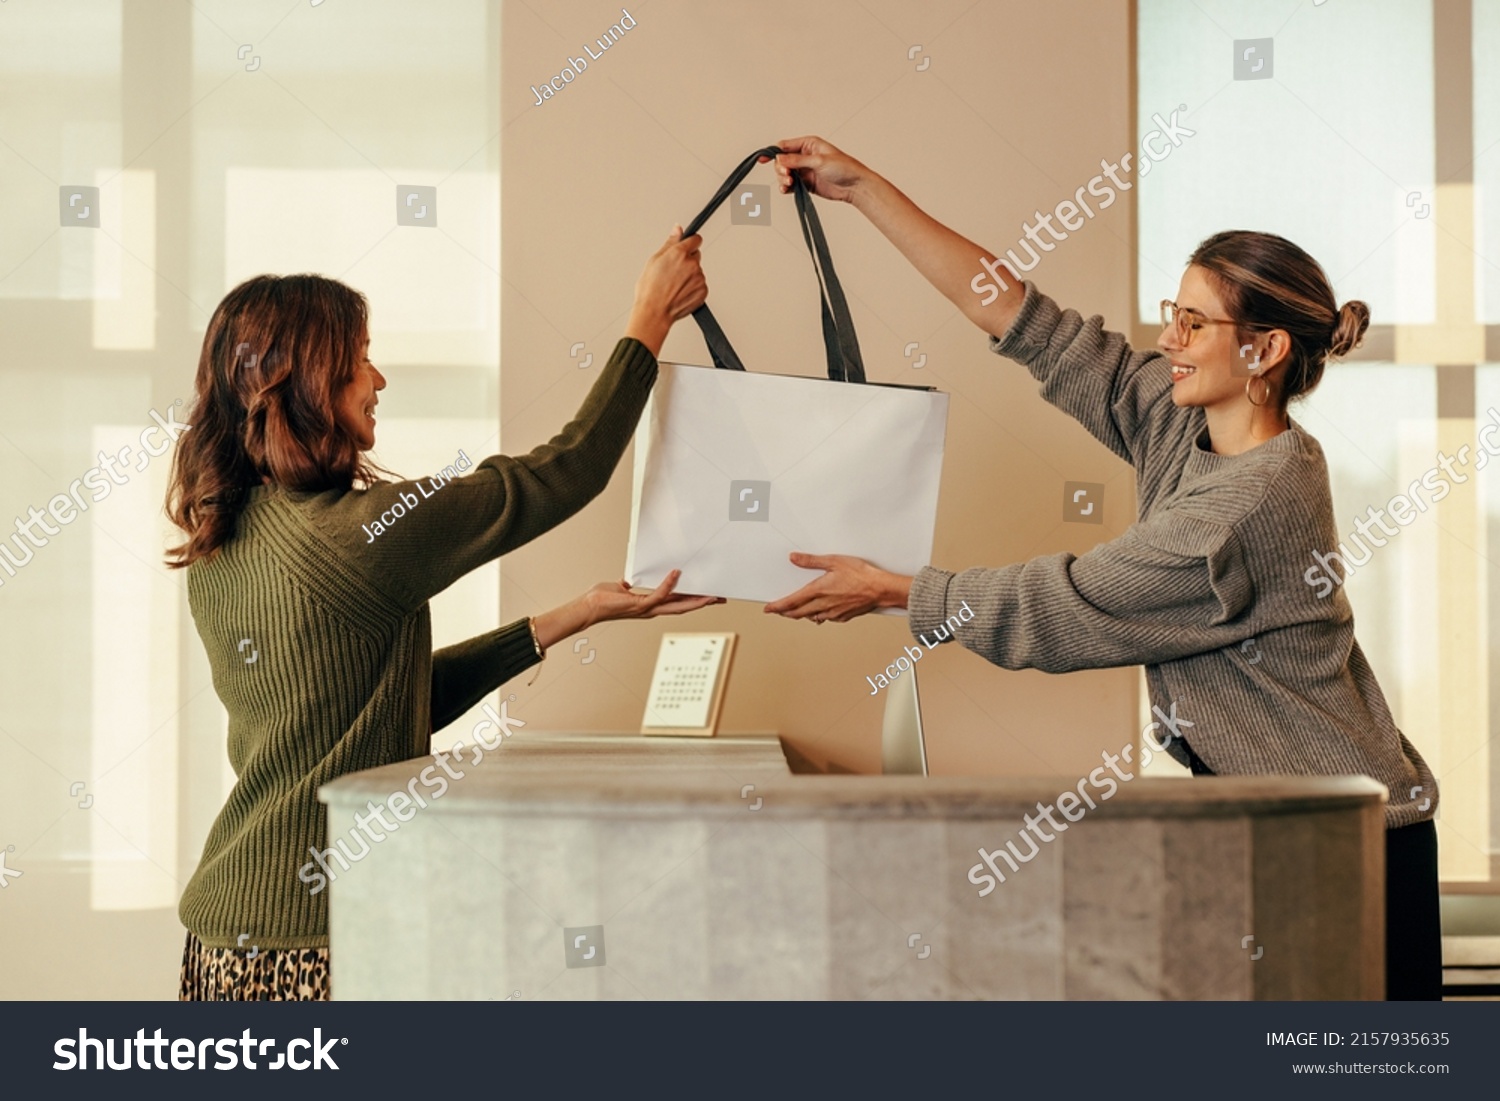 Clothing store owner handing a female customer a shopping bag with her clothing items. Happy small business owner assisting an online shopper during an in store collection. #2157935635